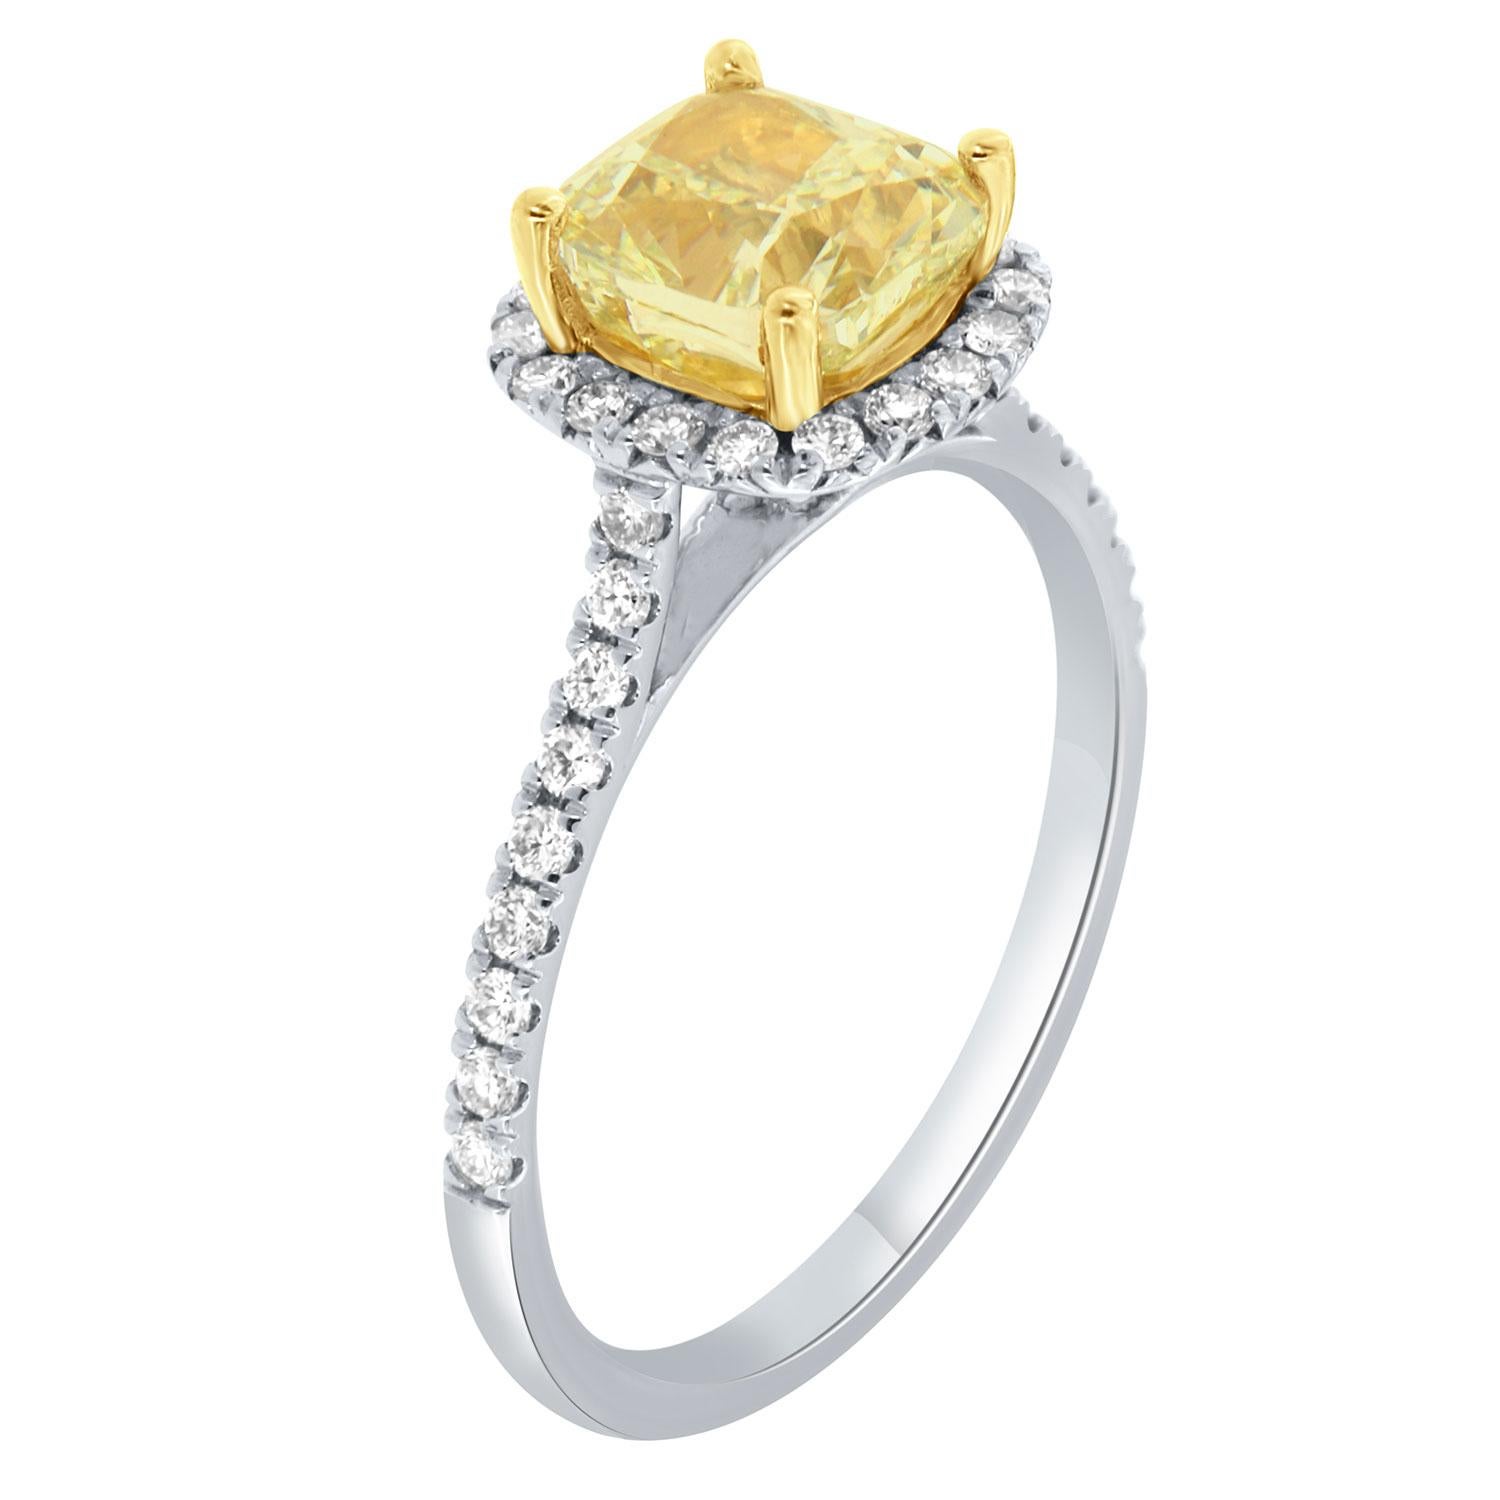 This 18K White and Yellow gold ring feature a 1.60-Carat cushion-shaped Yellow diamond. A halo of brilliant round diamonds encircles the center yellow diamond. One row of diamonds Micro-Prong set underneath the halo on the yellow gold cup completes